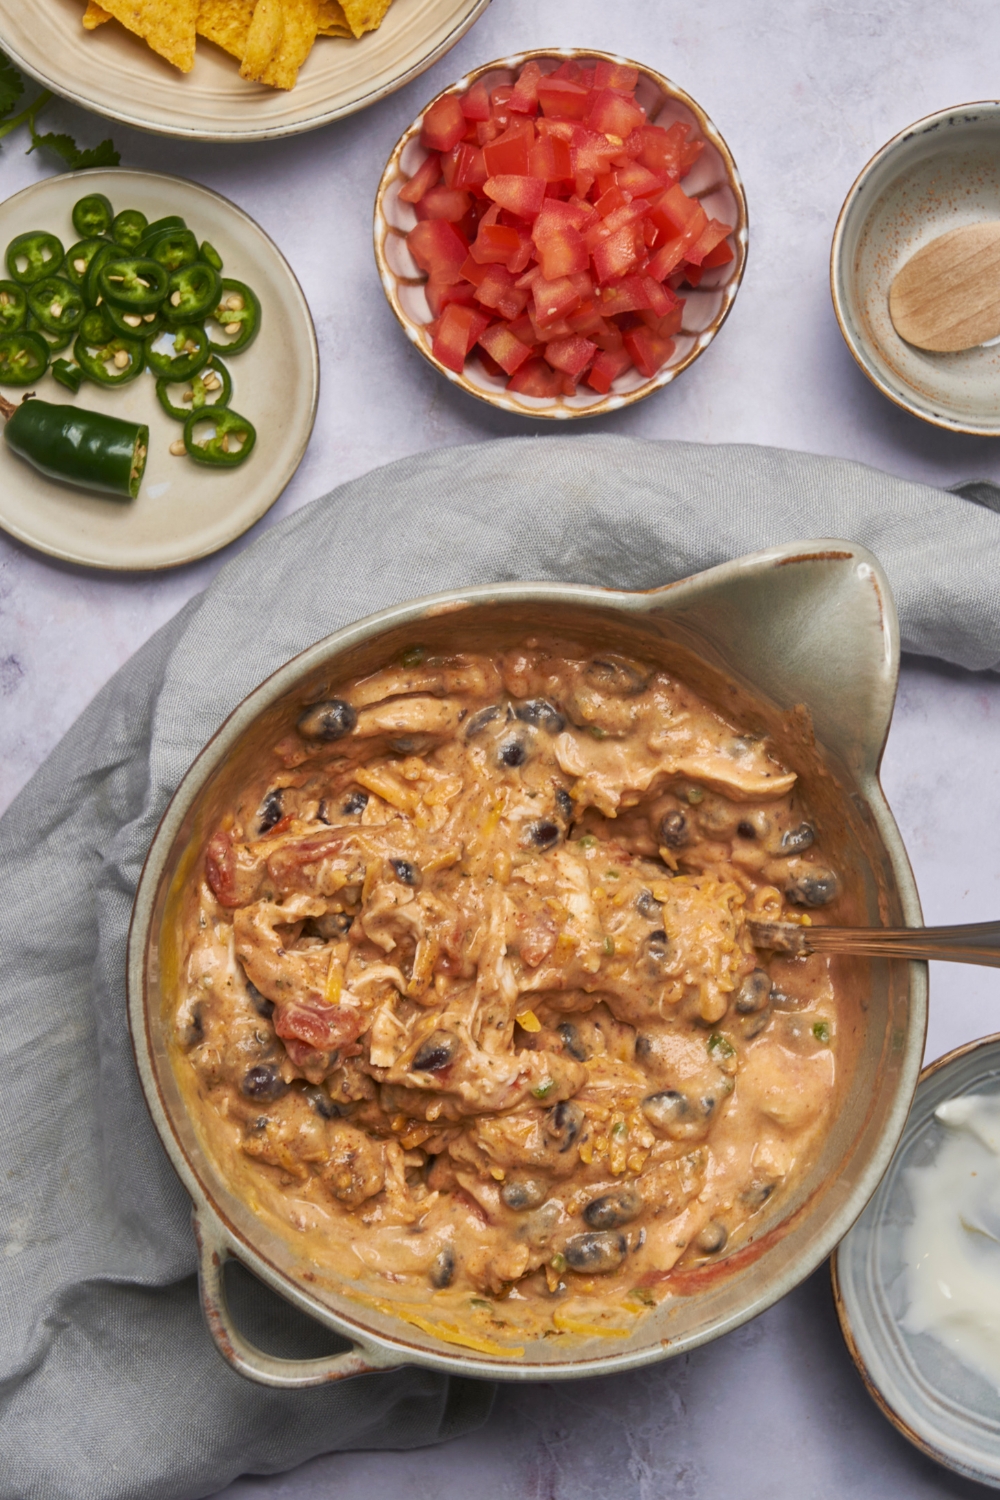 A creamy mixture that has shredded cheddar cheese, black beans, shredded chicken, and tomatoes in it.